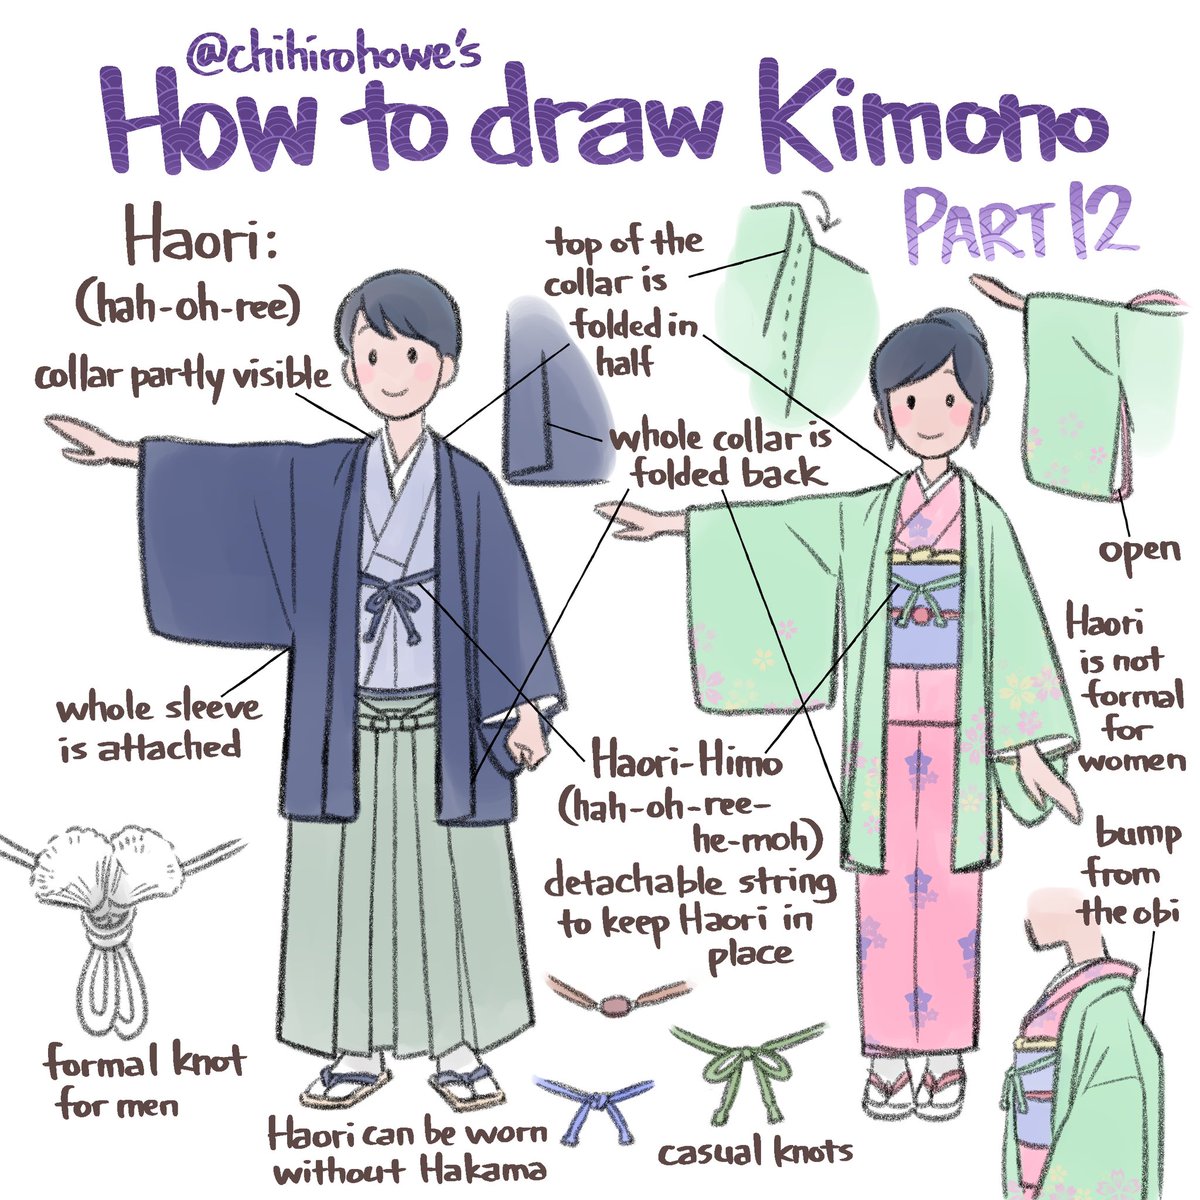  #kimono Part 12Haori is like a cardigan, and it is also part of men’s formal wear.The length of the Haori depends on what’s trendy at the time.Haori for men and women has slightly different features.There are different types of Haori-Himo that you can mix and match.